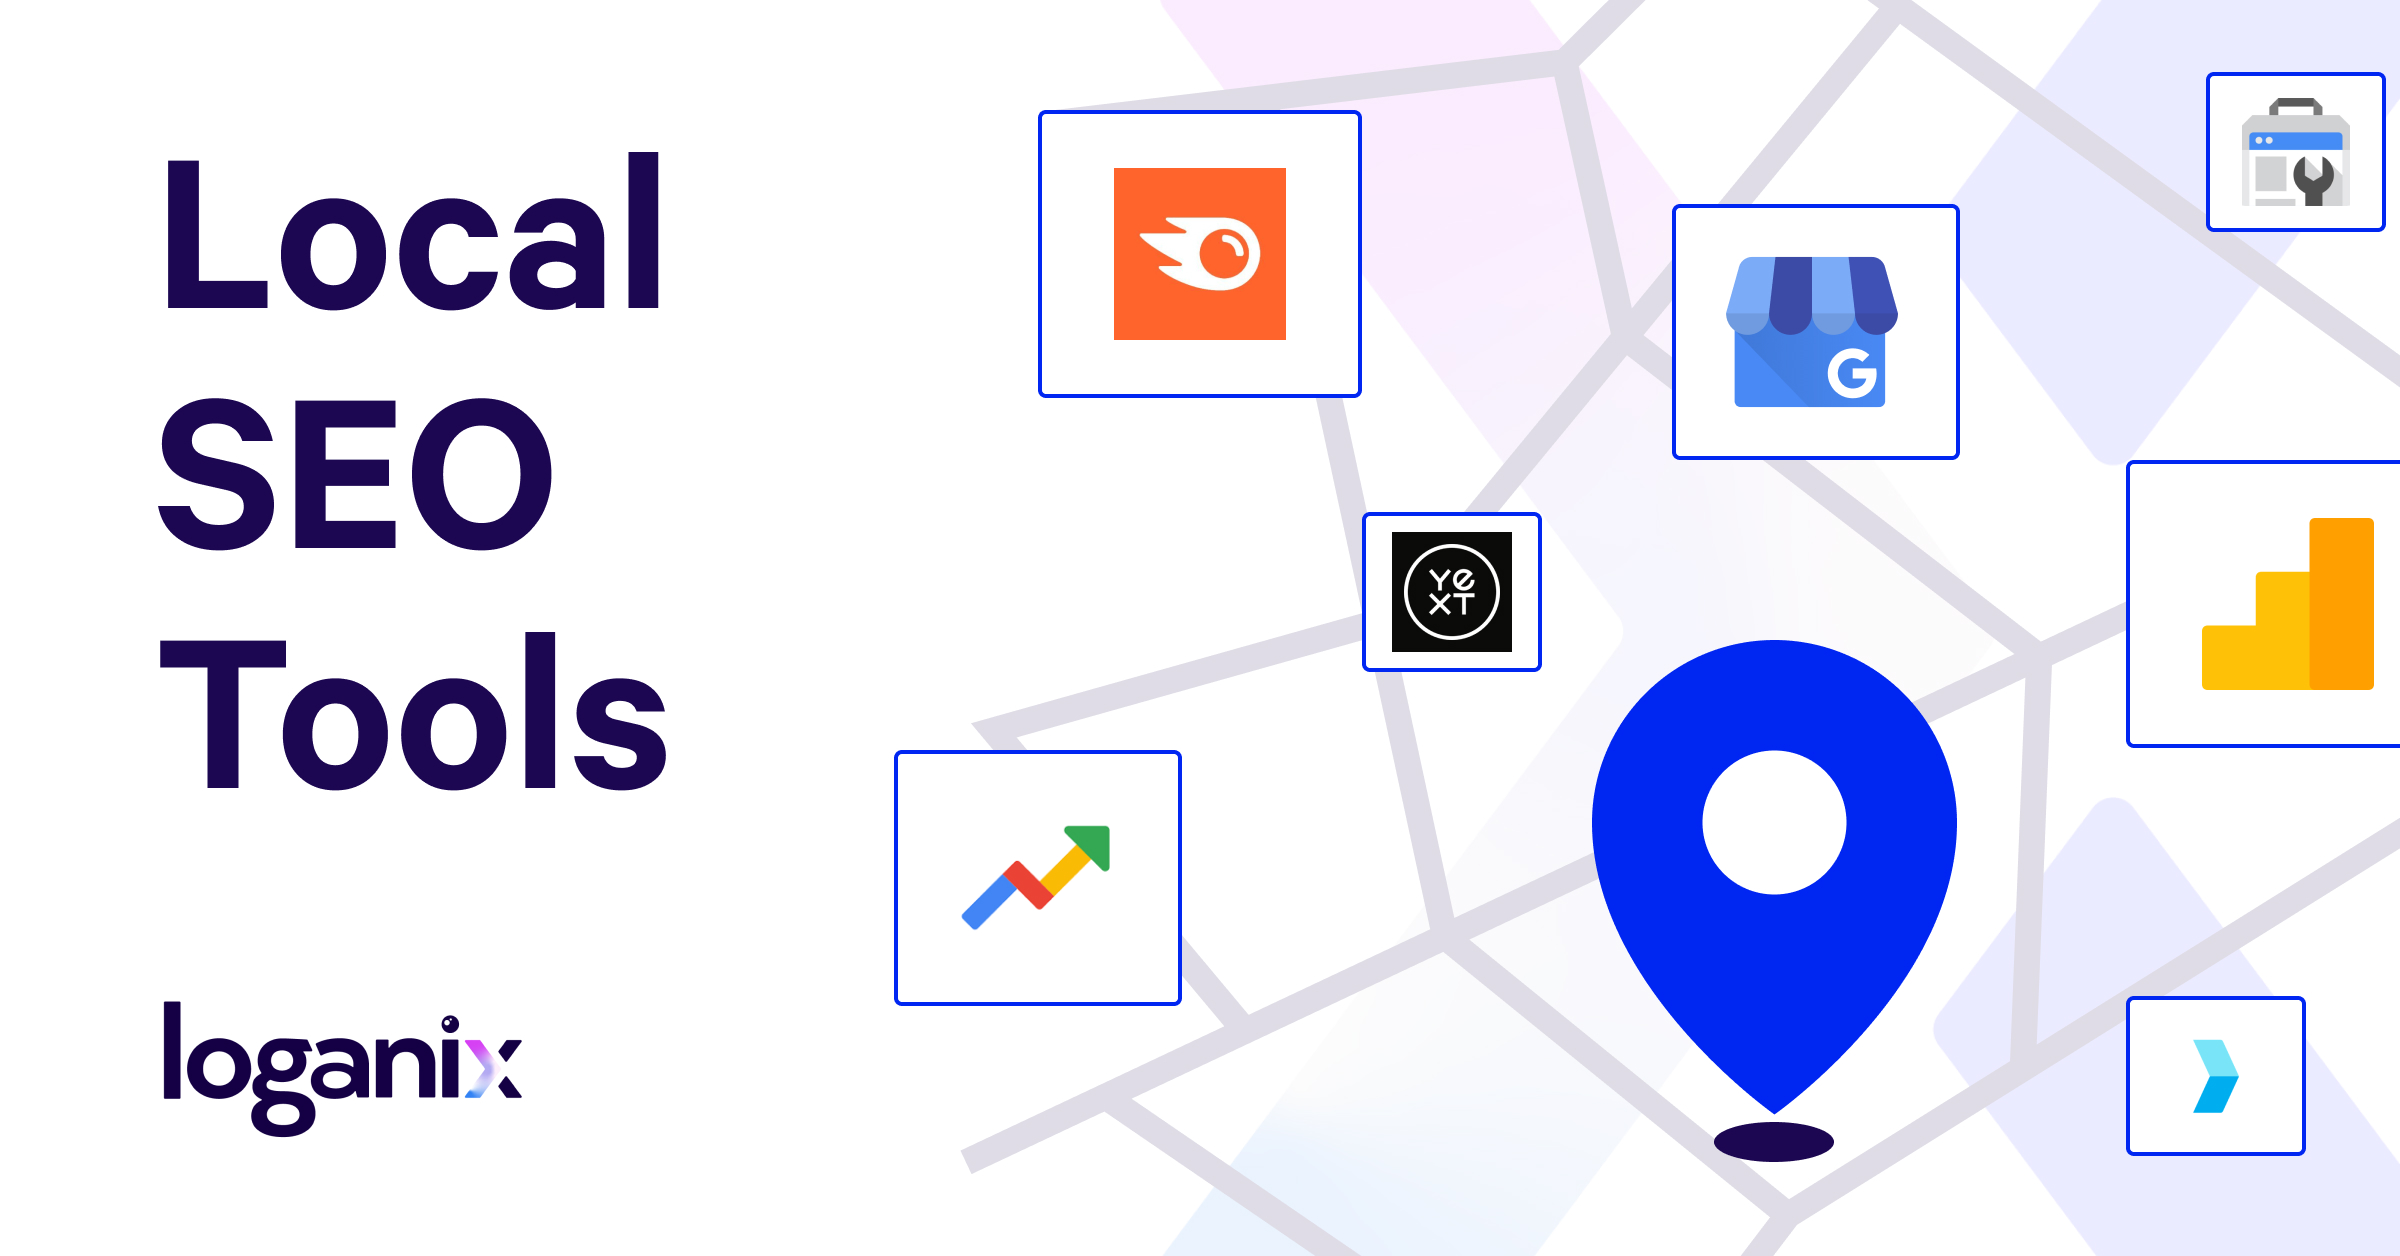 9 Local Link Building Tactics to Boost Your Local SEO - BrightLocal